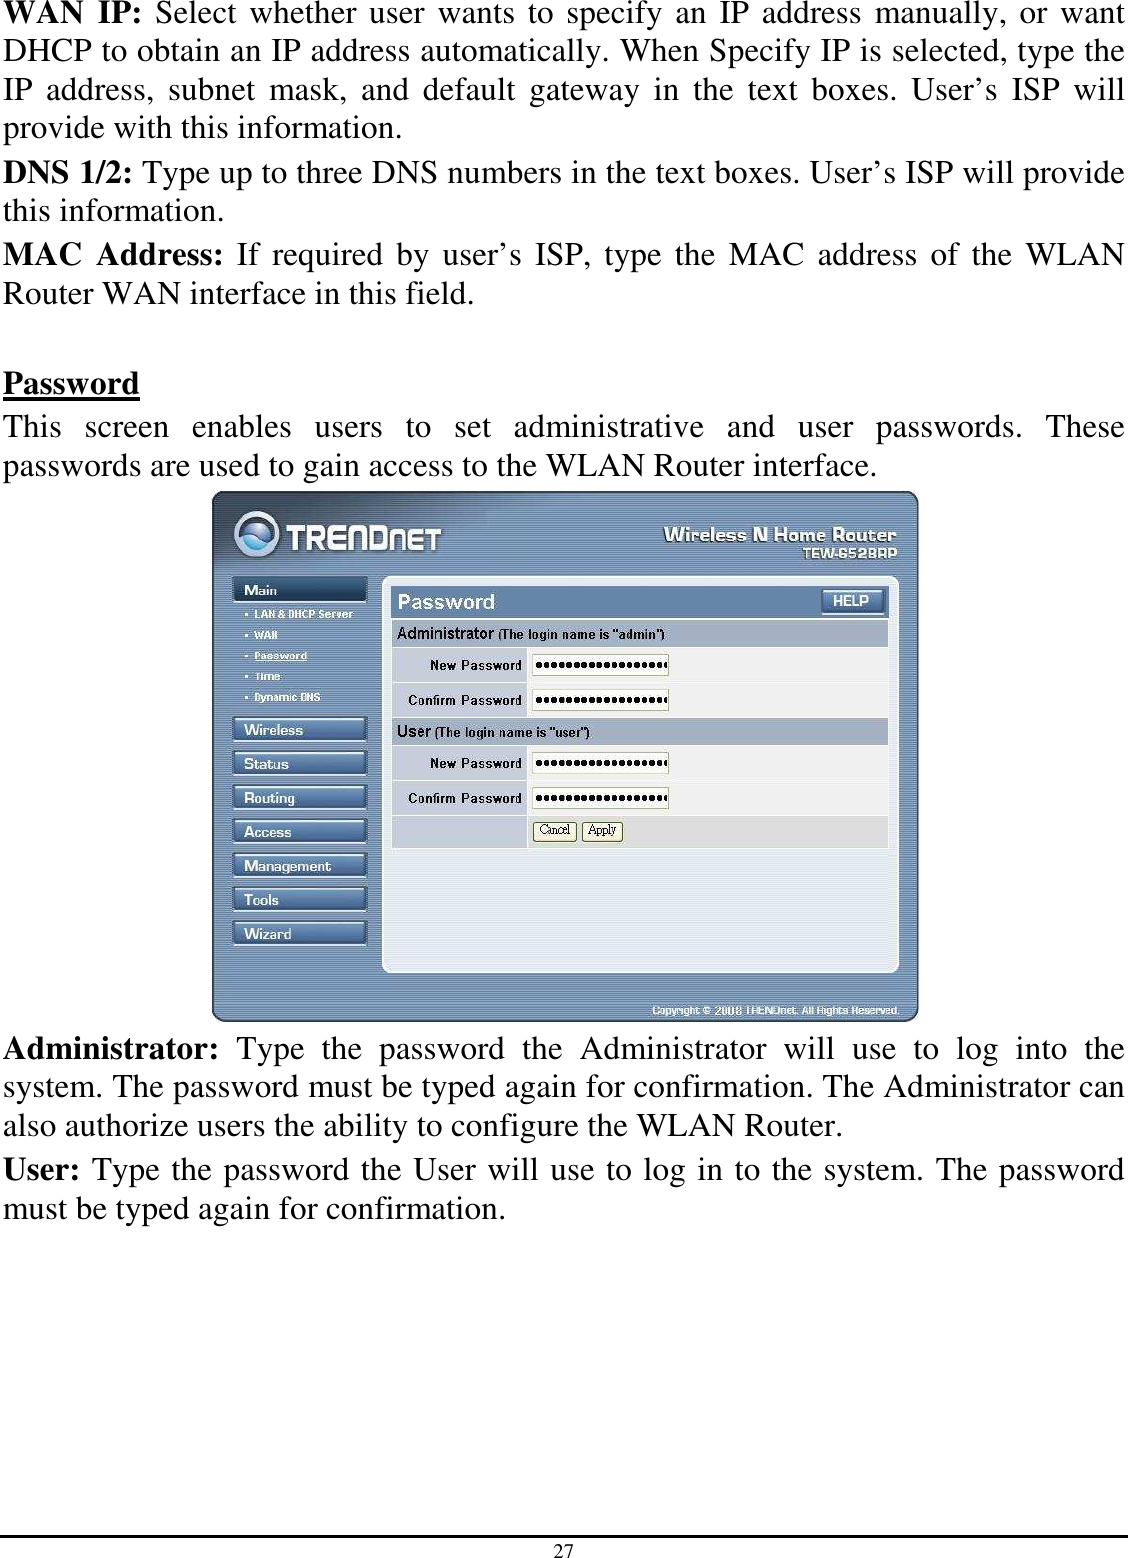 27 WAN IP: Select whether user wants to specify an IP address manually, or want DHCP to obtain an IP address automatically. When Specify IP is selected, type the IP  address,  subnet  mask,  and  default  gateway  in  the  text  boxes.  User’s  ISP  will provide with this information. DNS 1/2: Type up to three DNS numbers in the text boxes. User’s ISP will provide this information. MAC  Address: If  required by user’s ISP, type the  MAC  address of  the  WLAN Router WAN interface in this field.  Password This  screen  enables  users  to  set  administrative  and  user  passwords.  These passwords are used to gain access to the WLAN Router interface.  Administrator:  Type  the  password  the  Administrator  will  use  to  log  into  the system. The password must be typed again for confirmation. The Administrator can also authorize users the ability to configure the WLAN Router. User: Type the password the User will use to log in to the system. The password must be typed again for confirmation.  